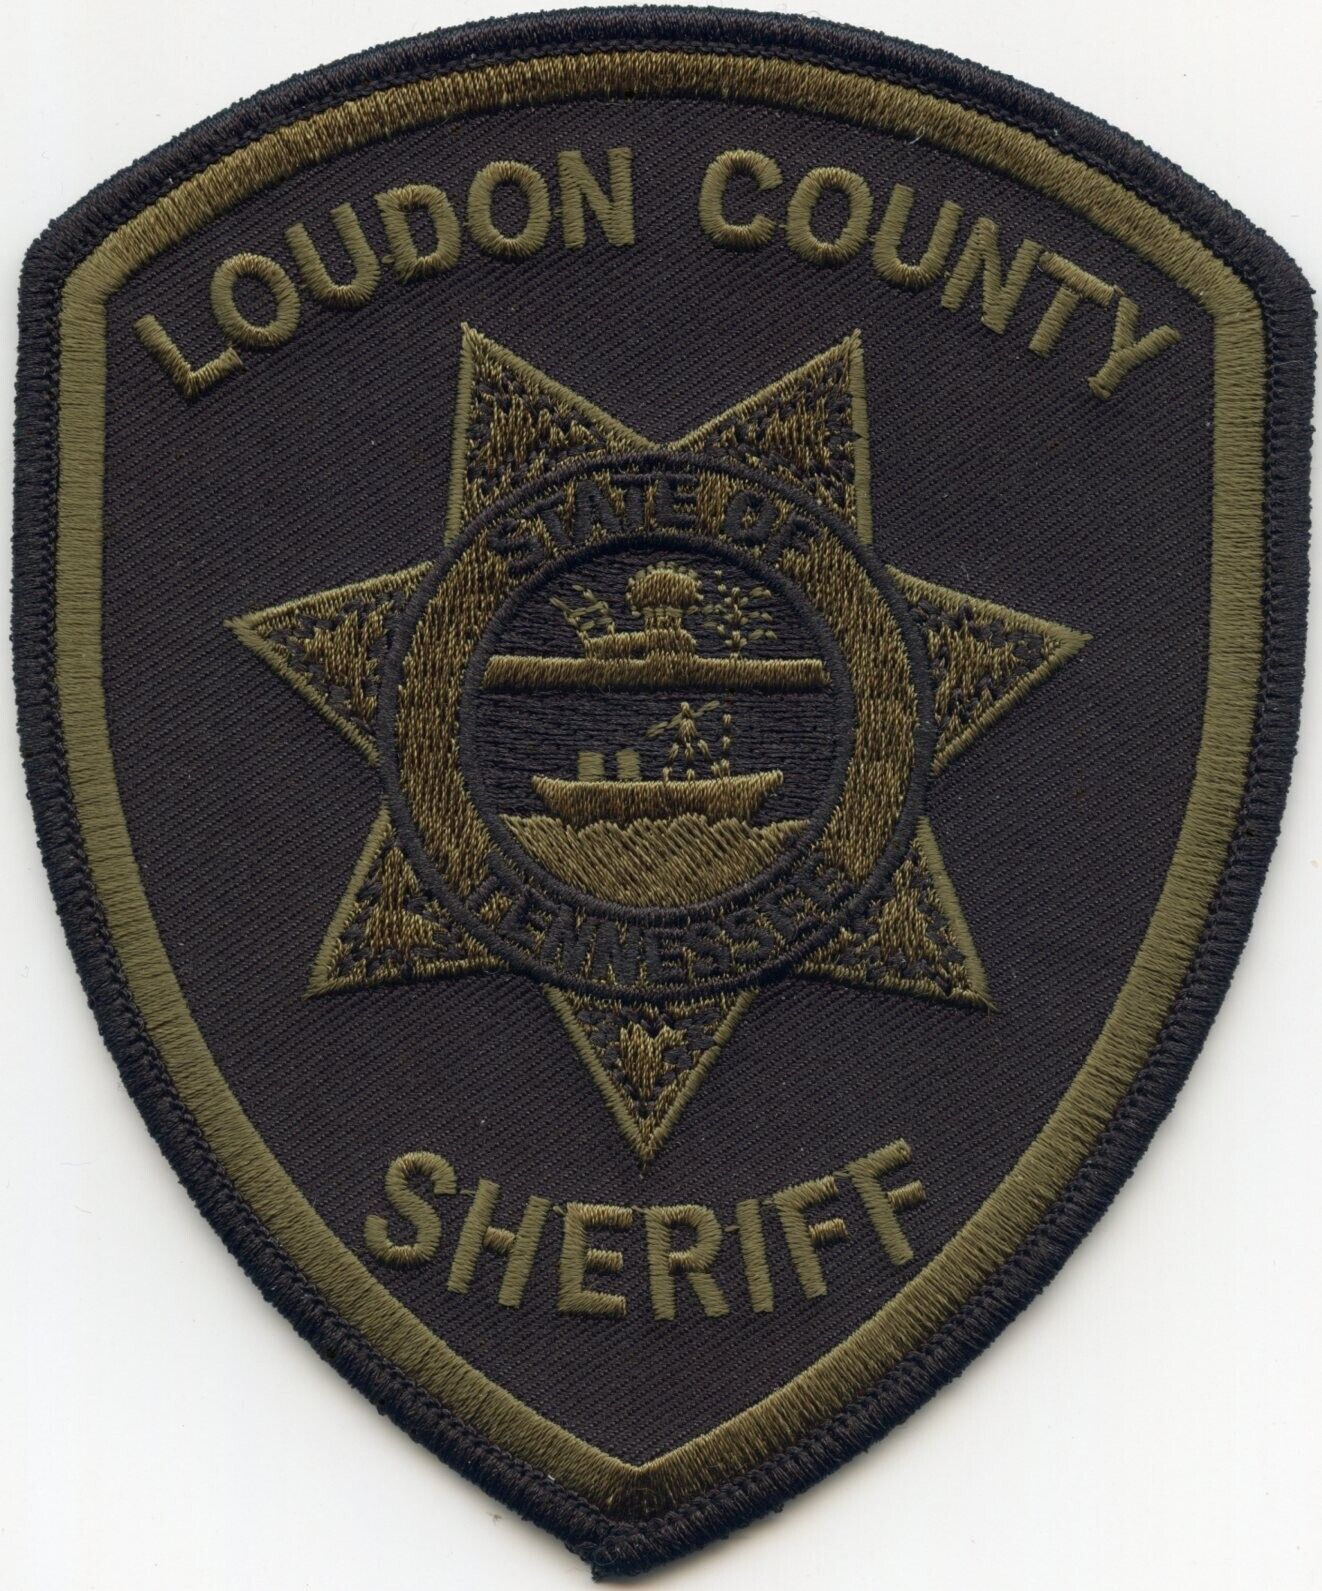 LOUDON COUNTY TENNESSEE subdued green SHERIFF POLICE PATCH